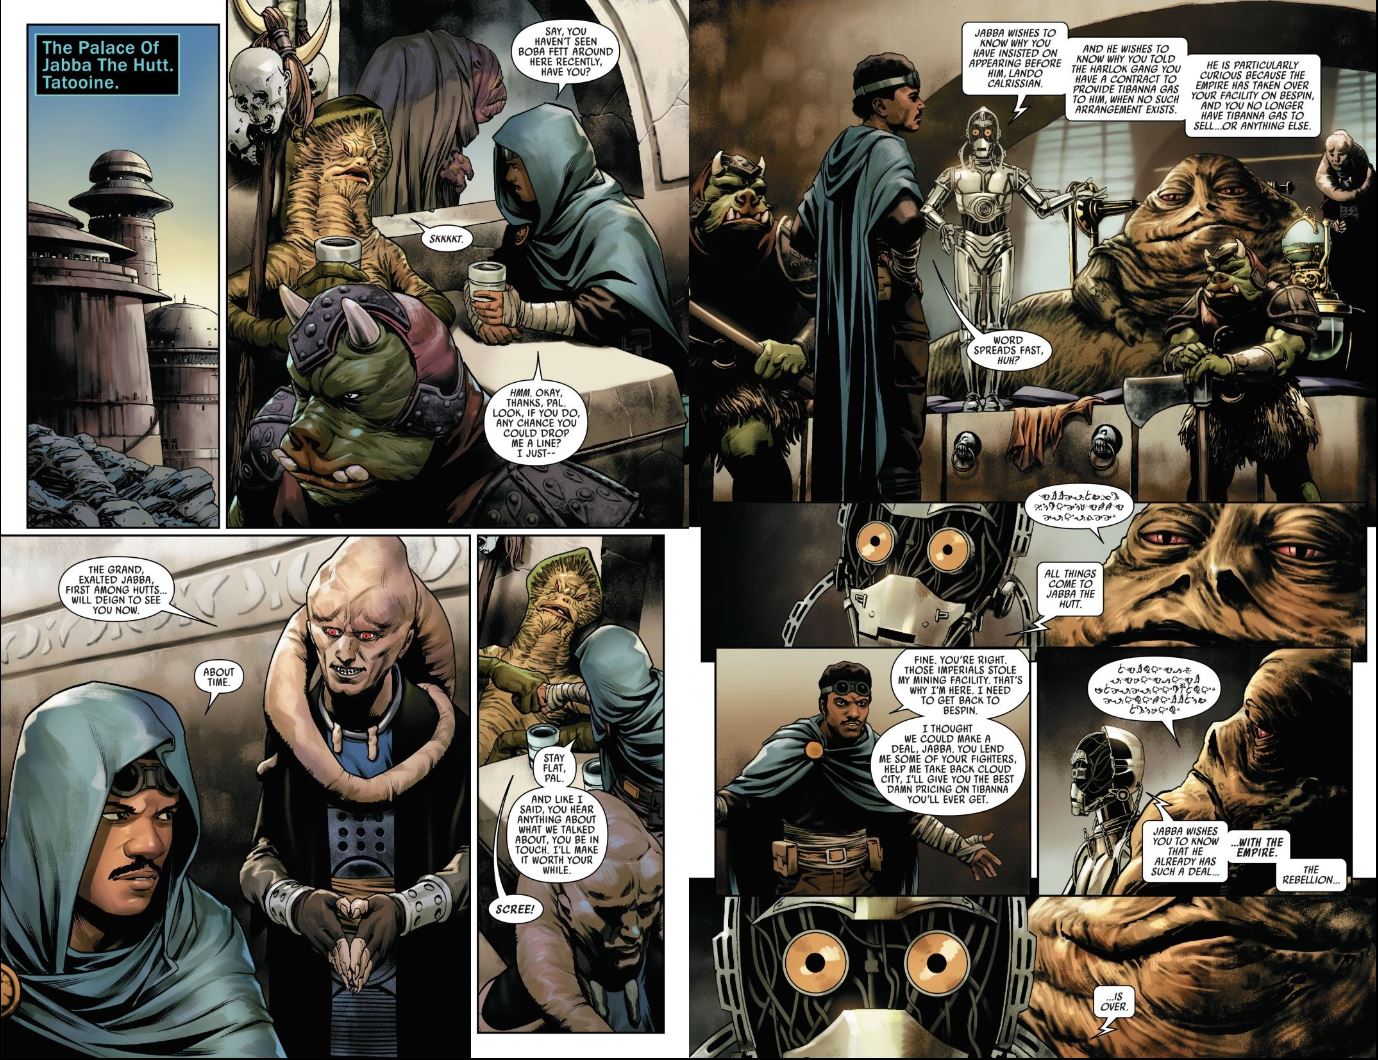 Star Wars (2020) #2 Lando has an audience with Jabba The Hut